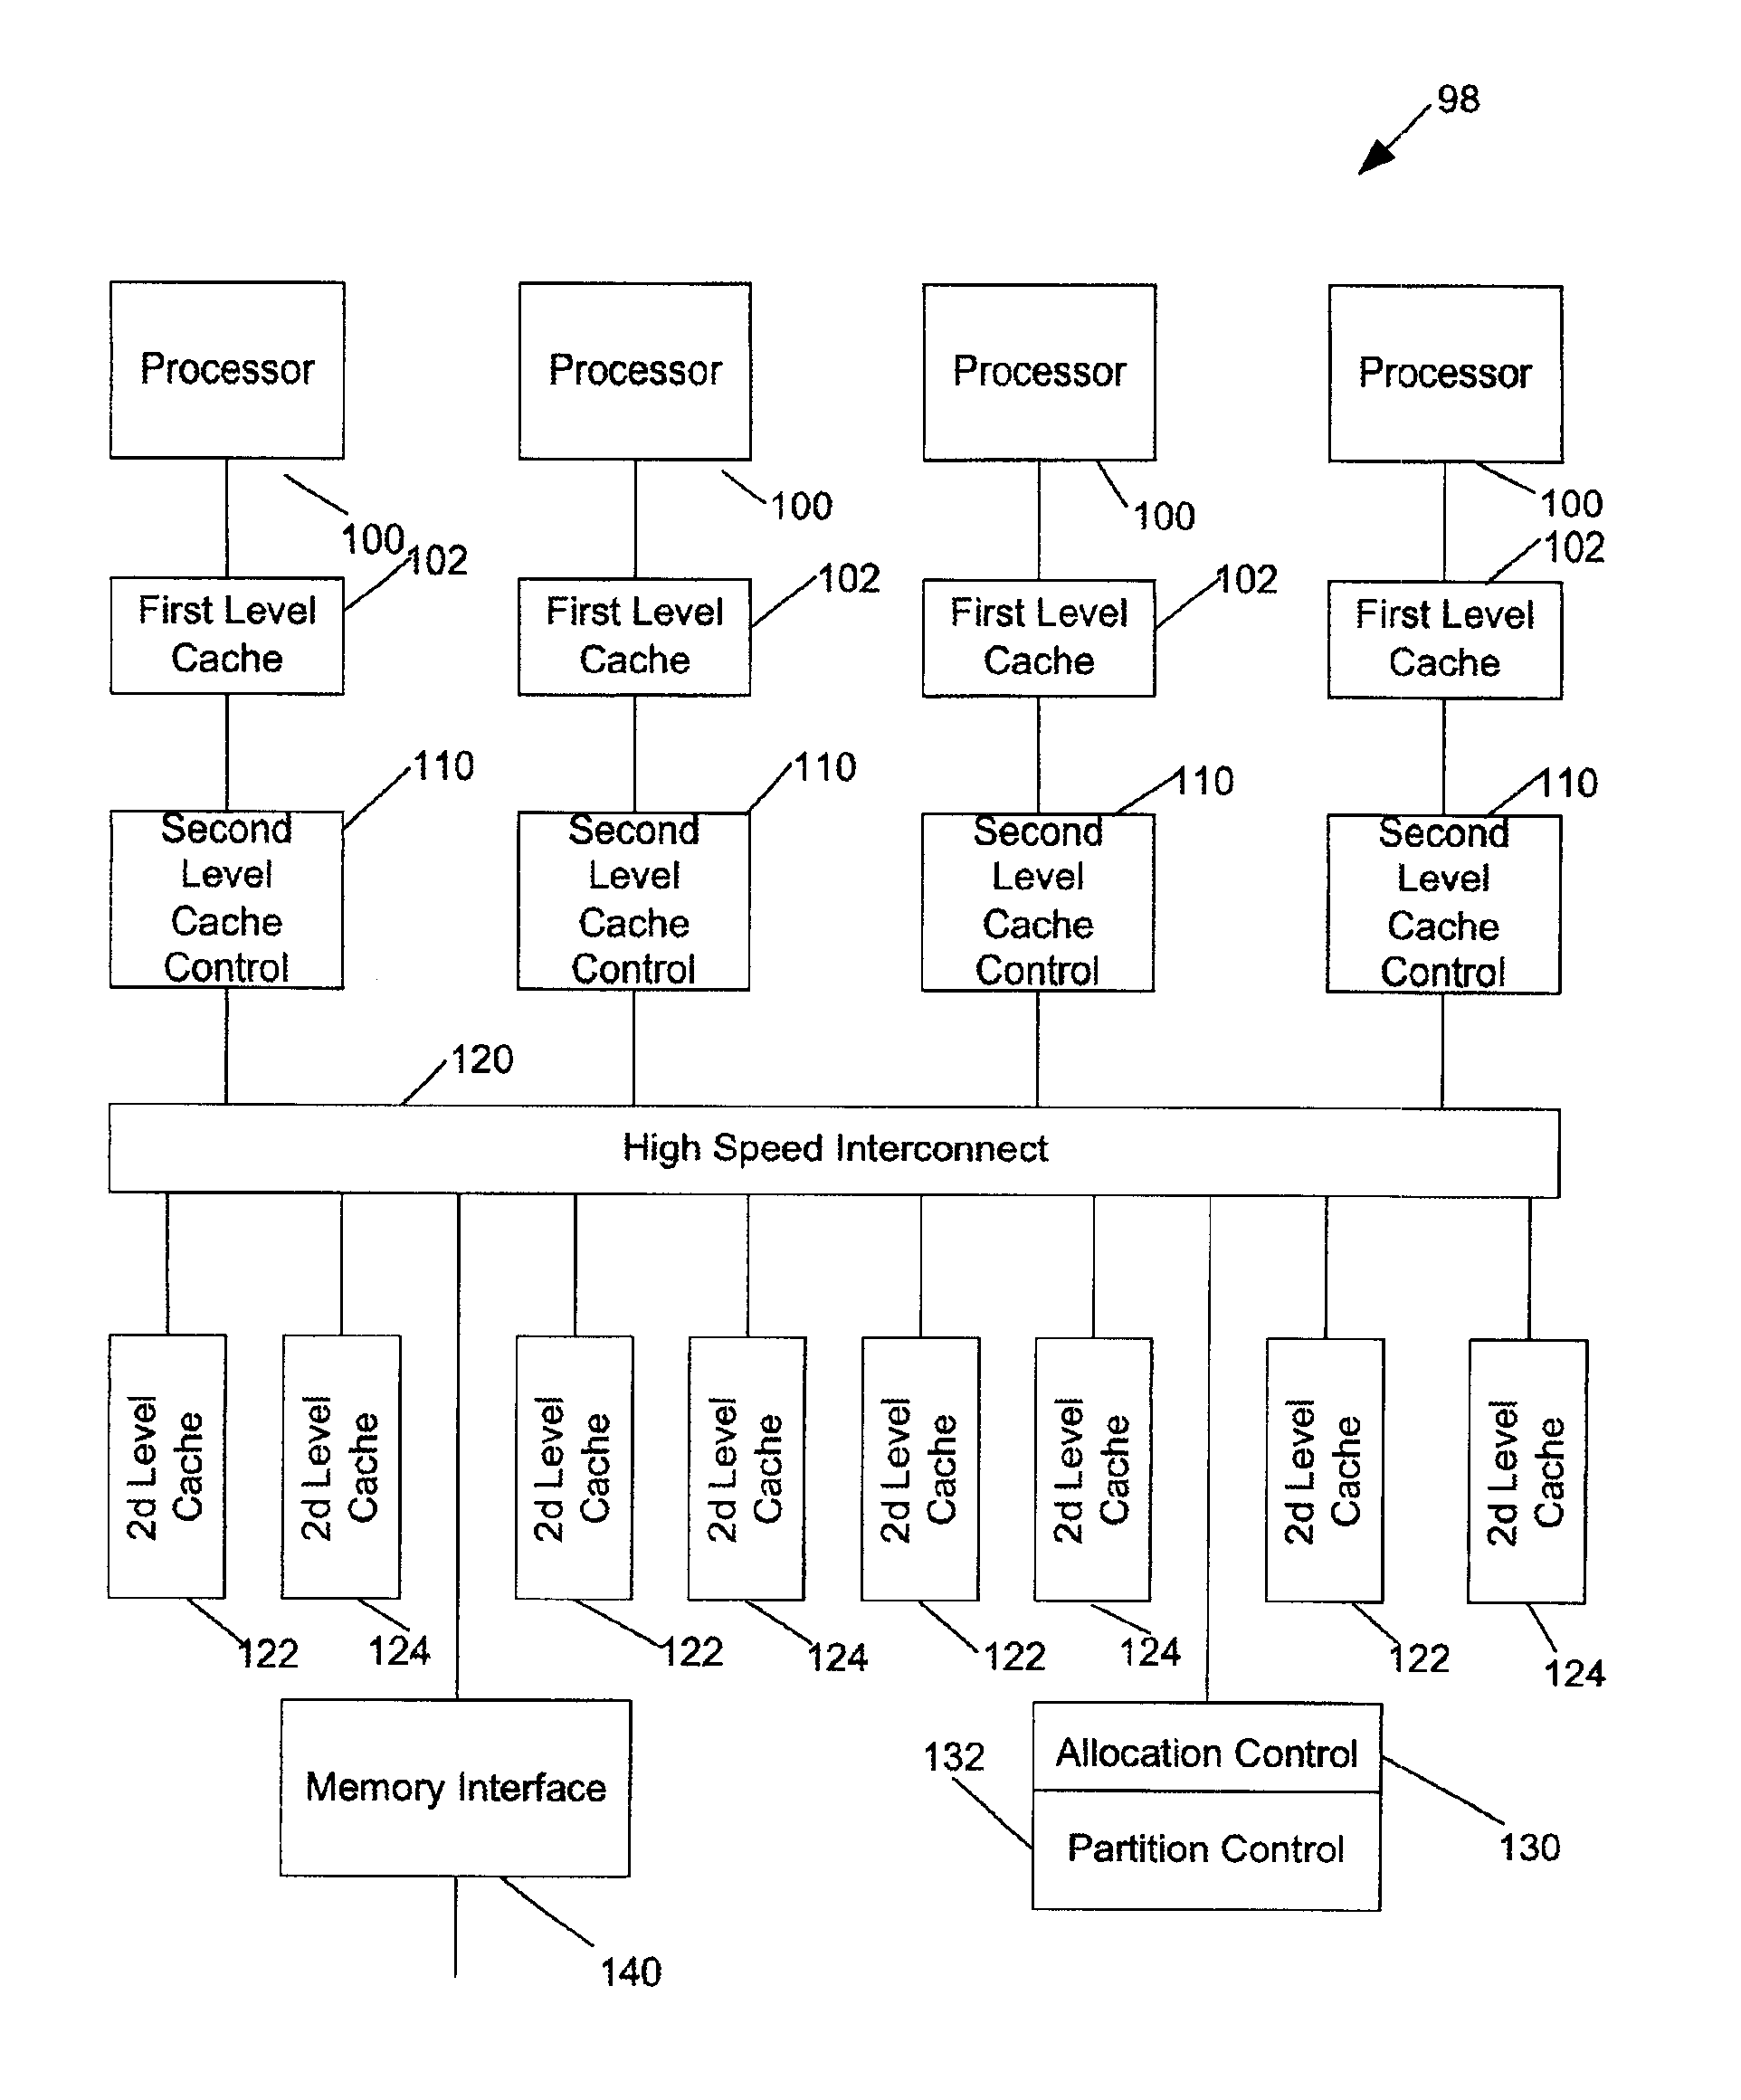 System and method for dynamic processor core and cache partitioning on large-scale multithreaded, multiprocessor integrated circuits